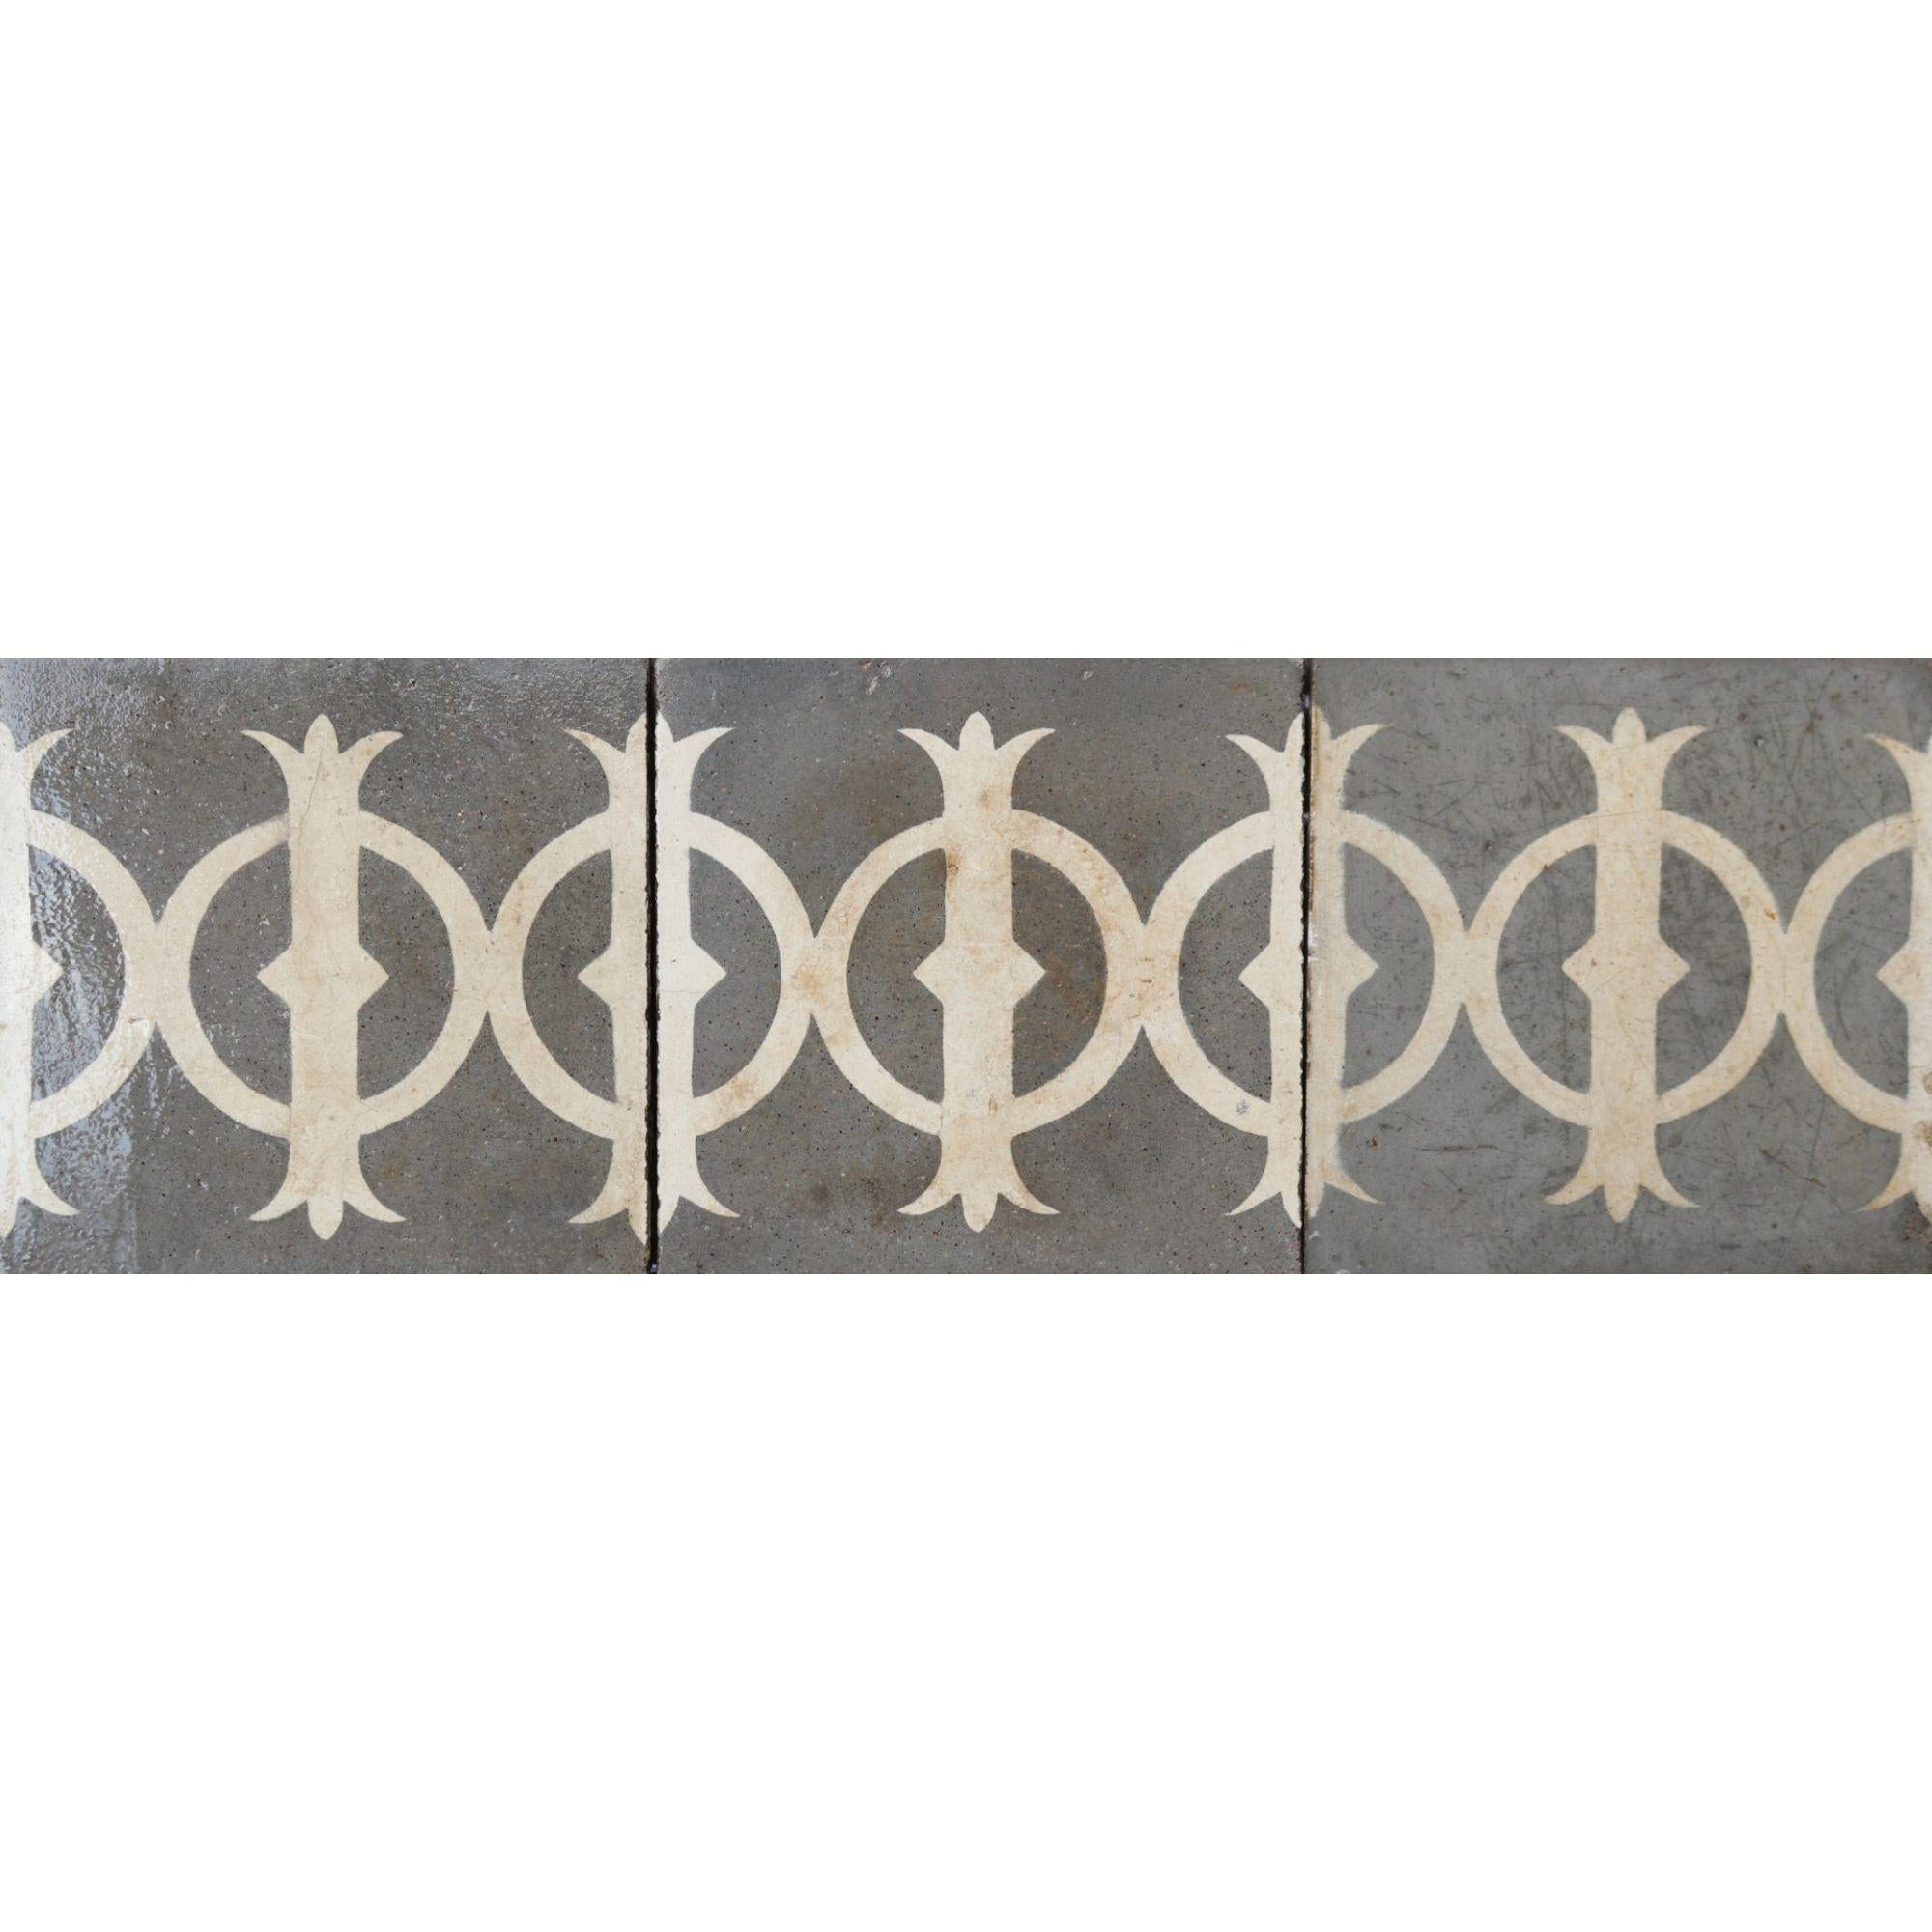 Victorian 15 Reclaimed Patterned Border Tiles for Floors or Walls For Sale